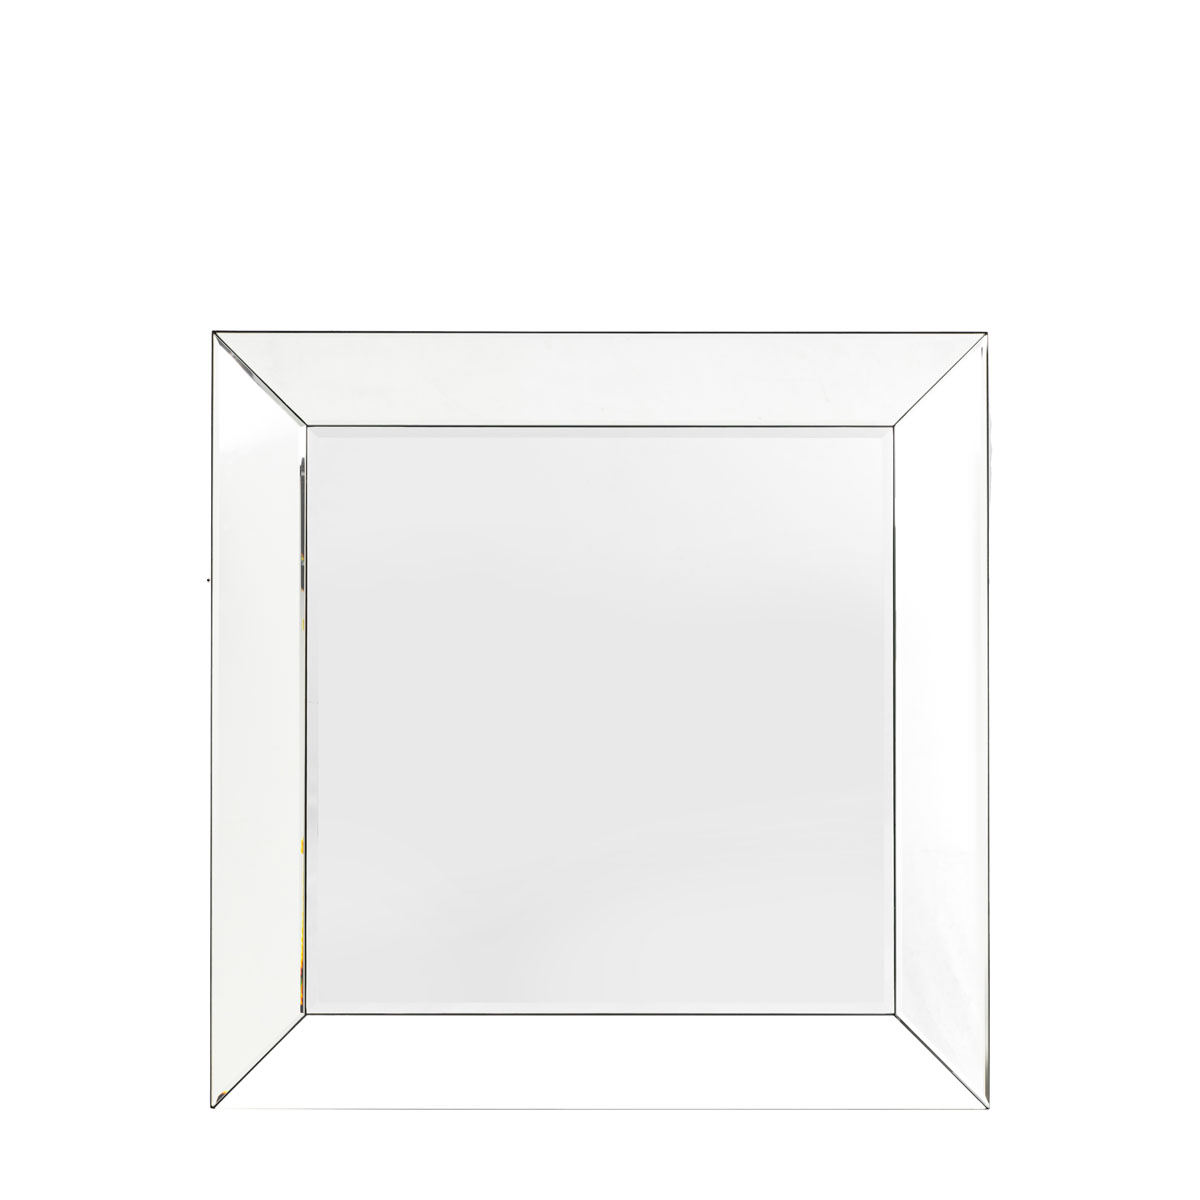 Greenhithe Square Mirror 900x70x900mm